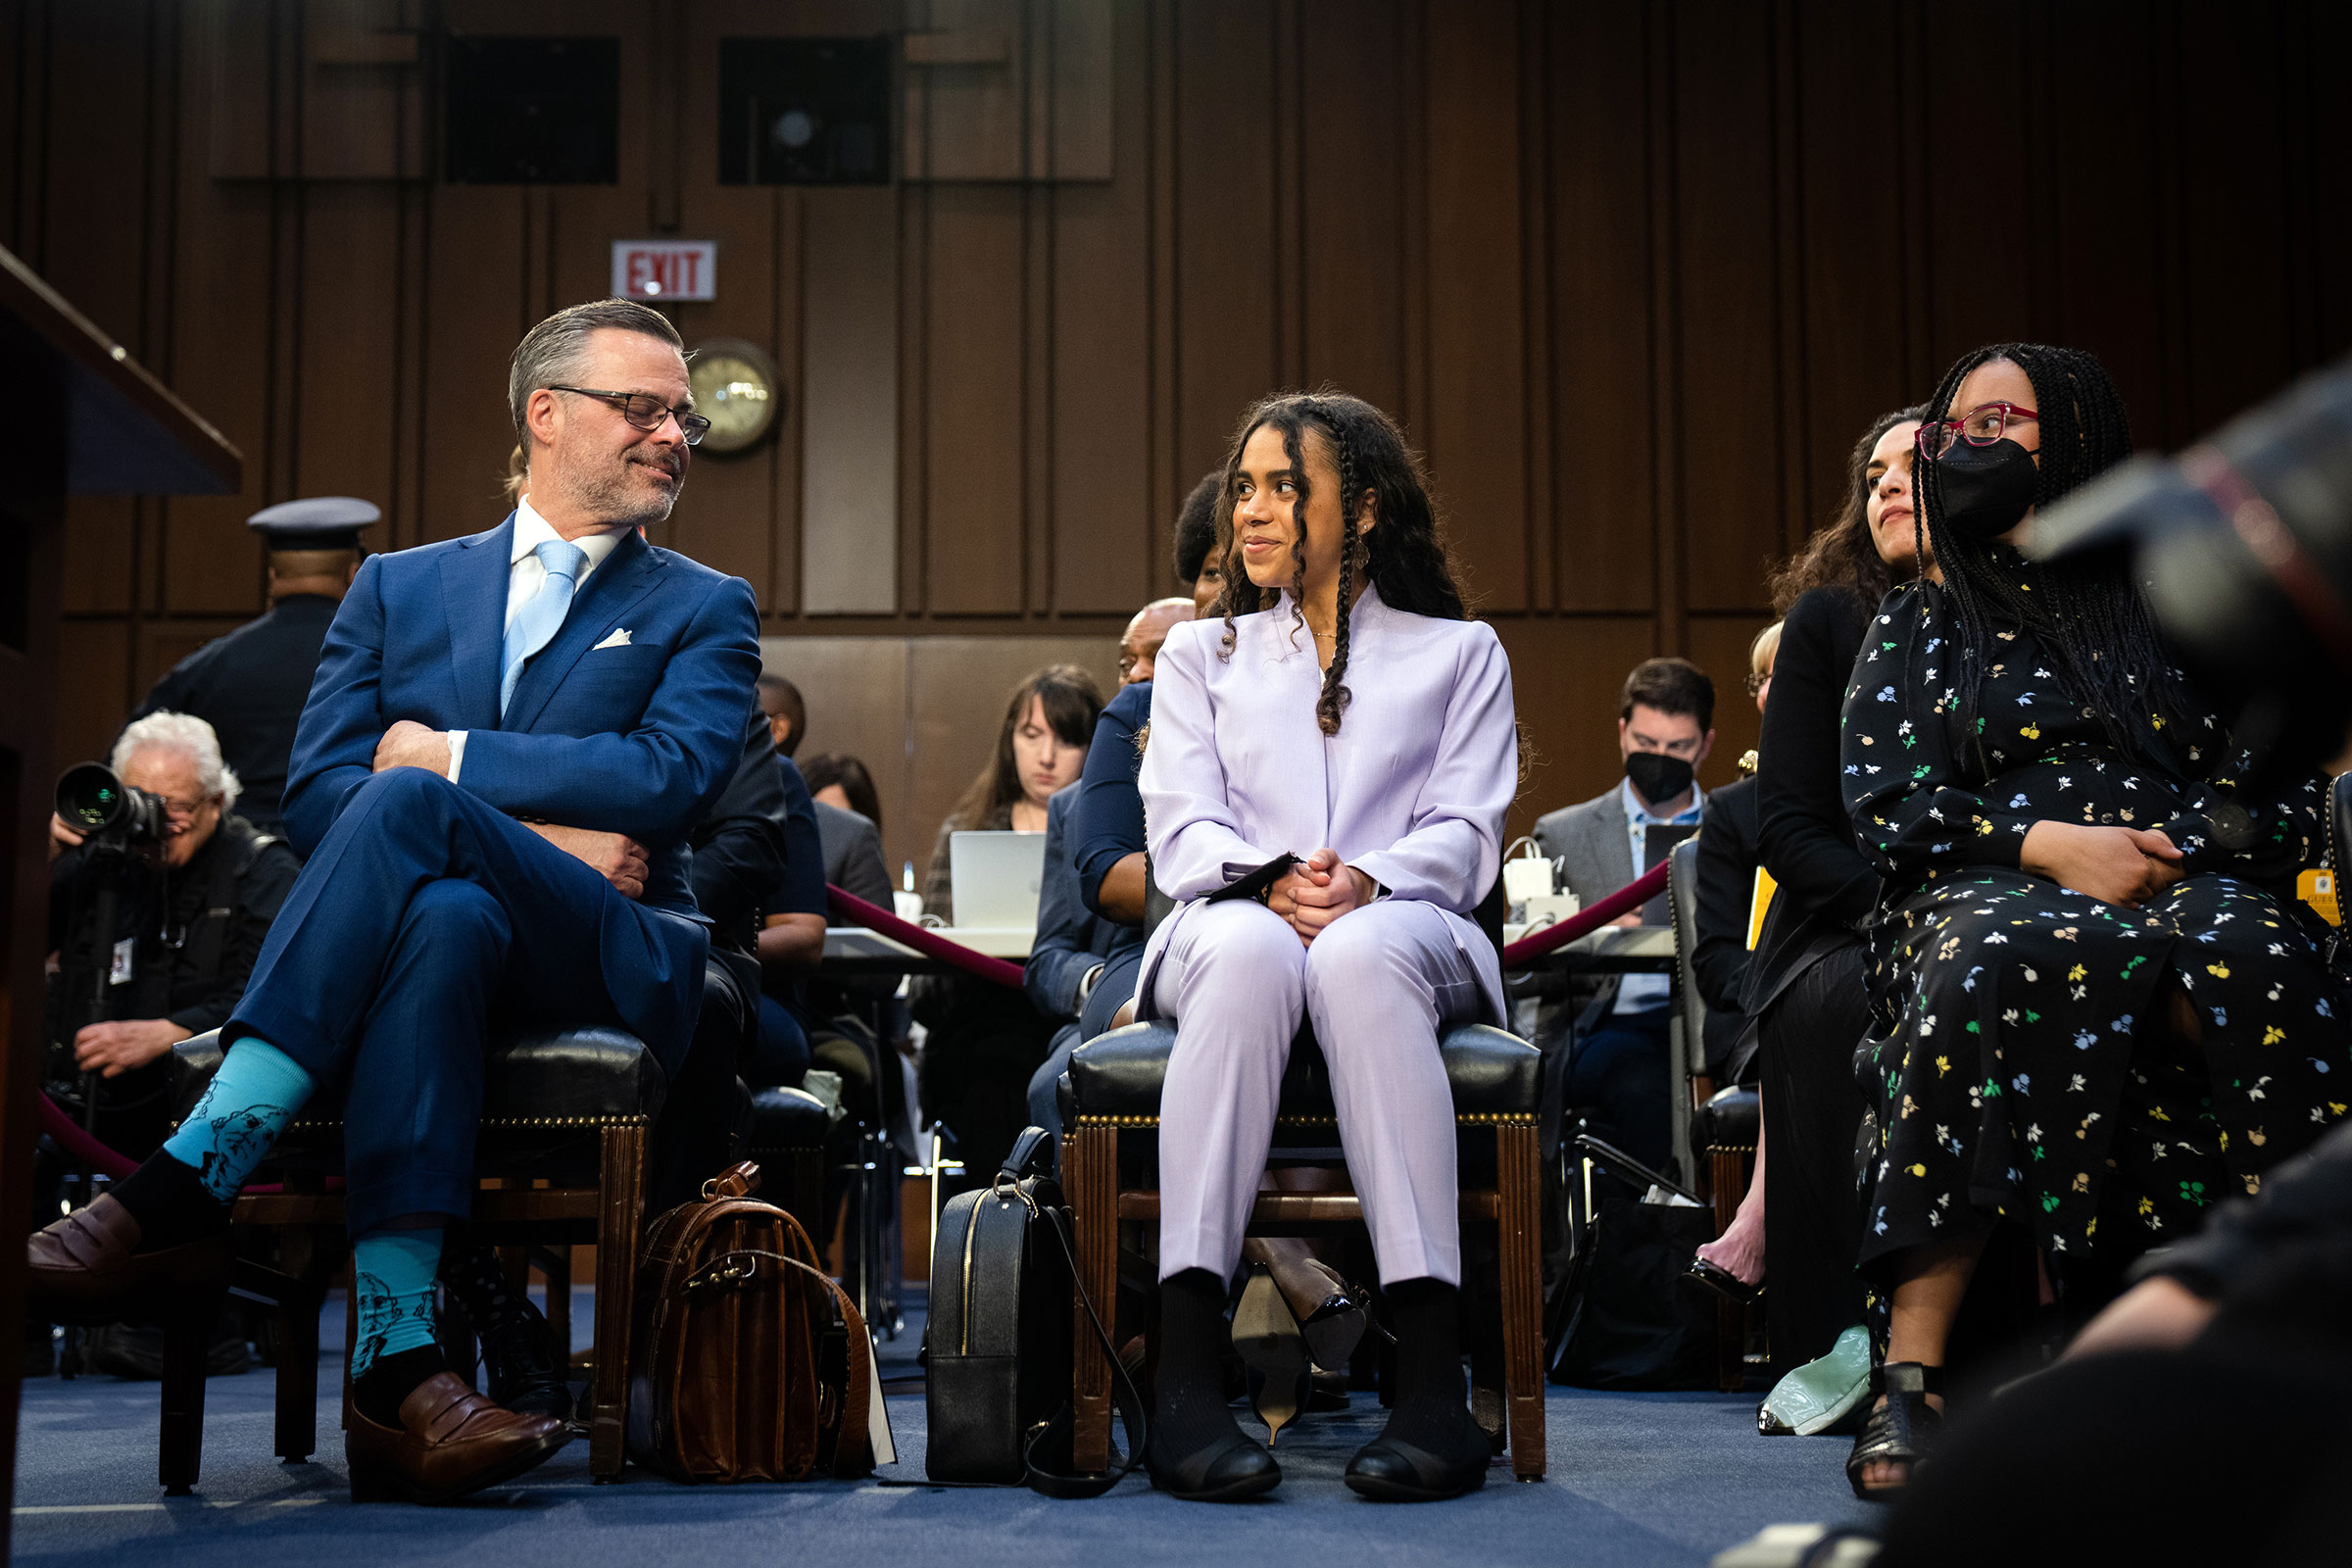 Leila Jackson, center, and Talia Jackson, right, look at their father Patrick Jackson during the hearing on March 21. Jackson gave her daughters a special message during her opening statement that day: "Girls, I know it has not been easy as I have tried to navigate the challenges of juggling my career and motherhood. And I fully admit that I did not always get the balance right," she said. "But I hope that you have seen that with hard work, determination, and love, it can be done." (Sarahbeth Maney—The New York Times/Redux)